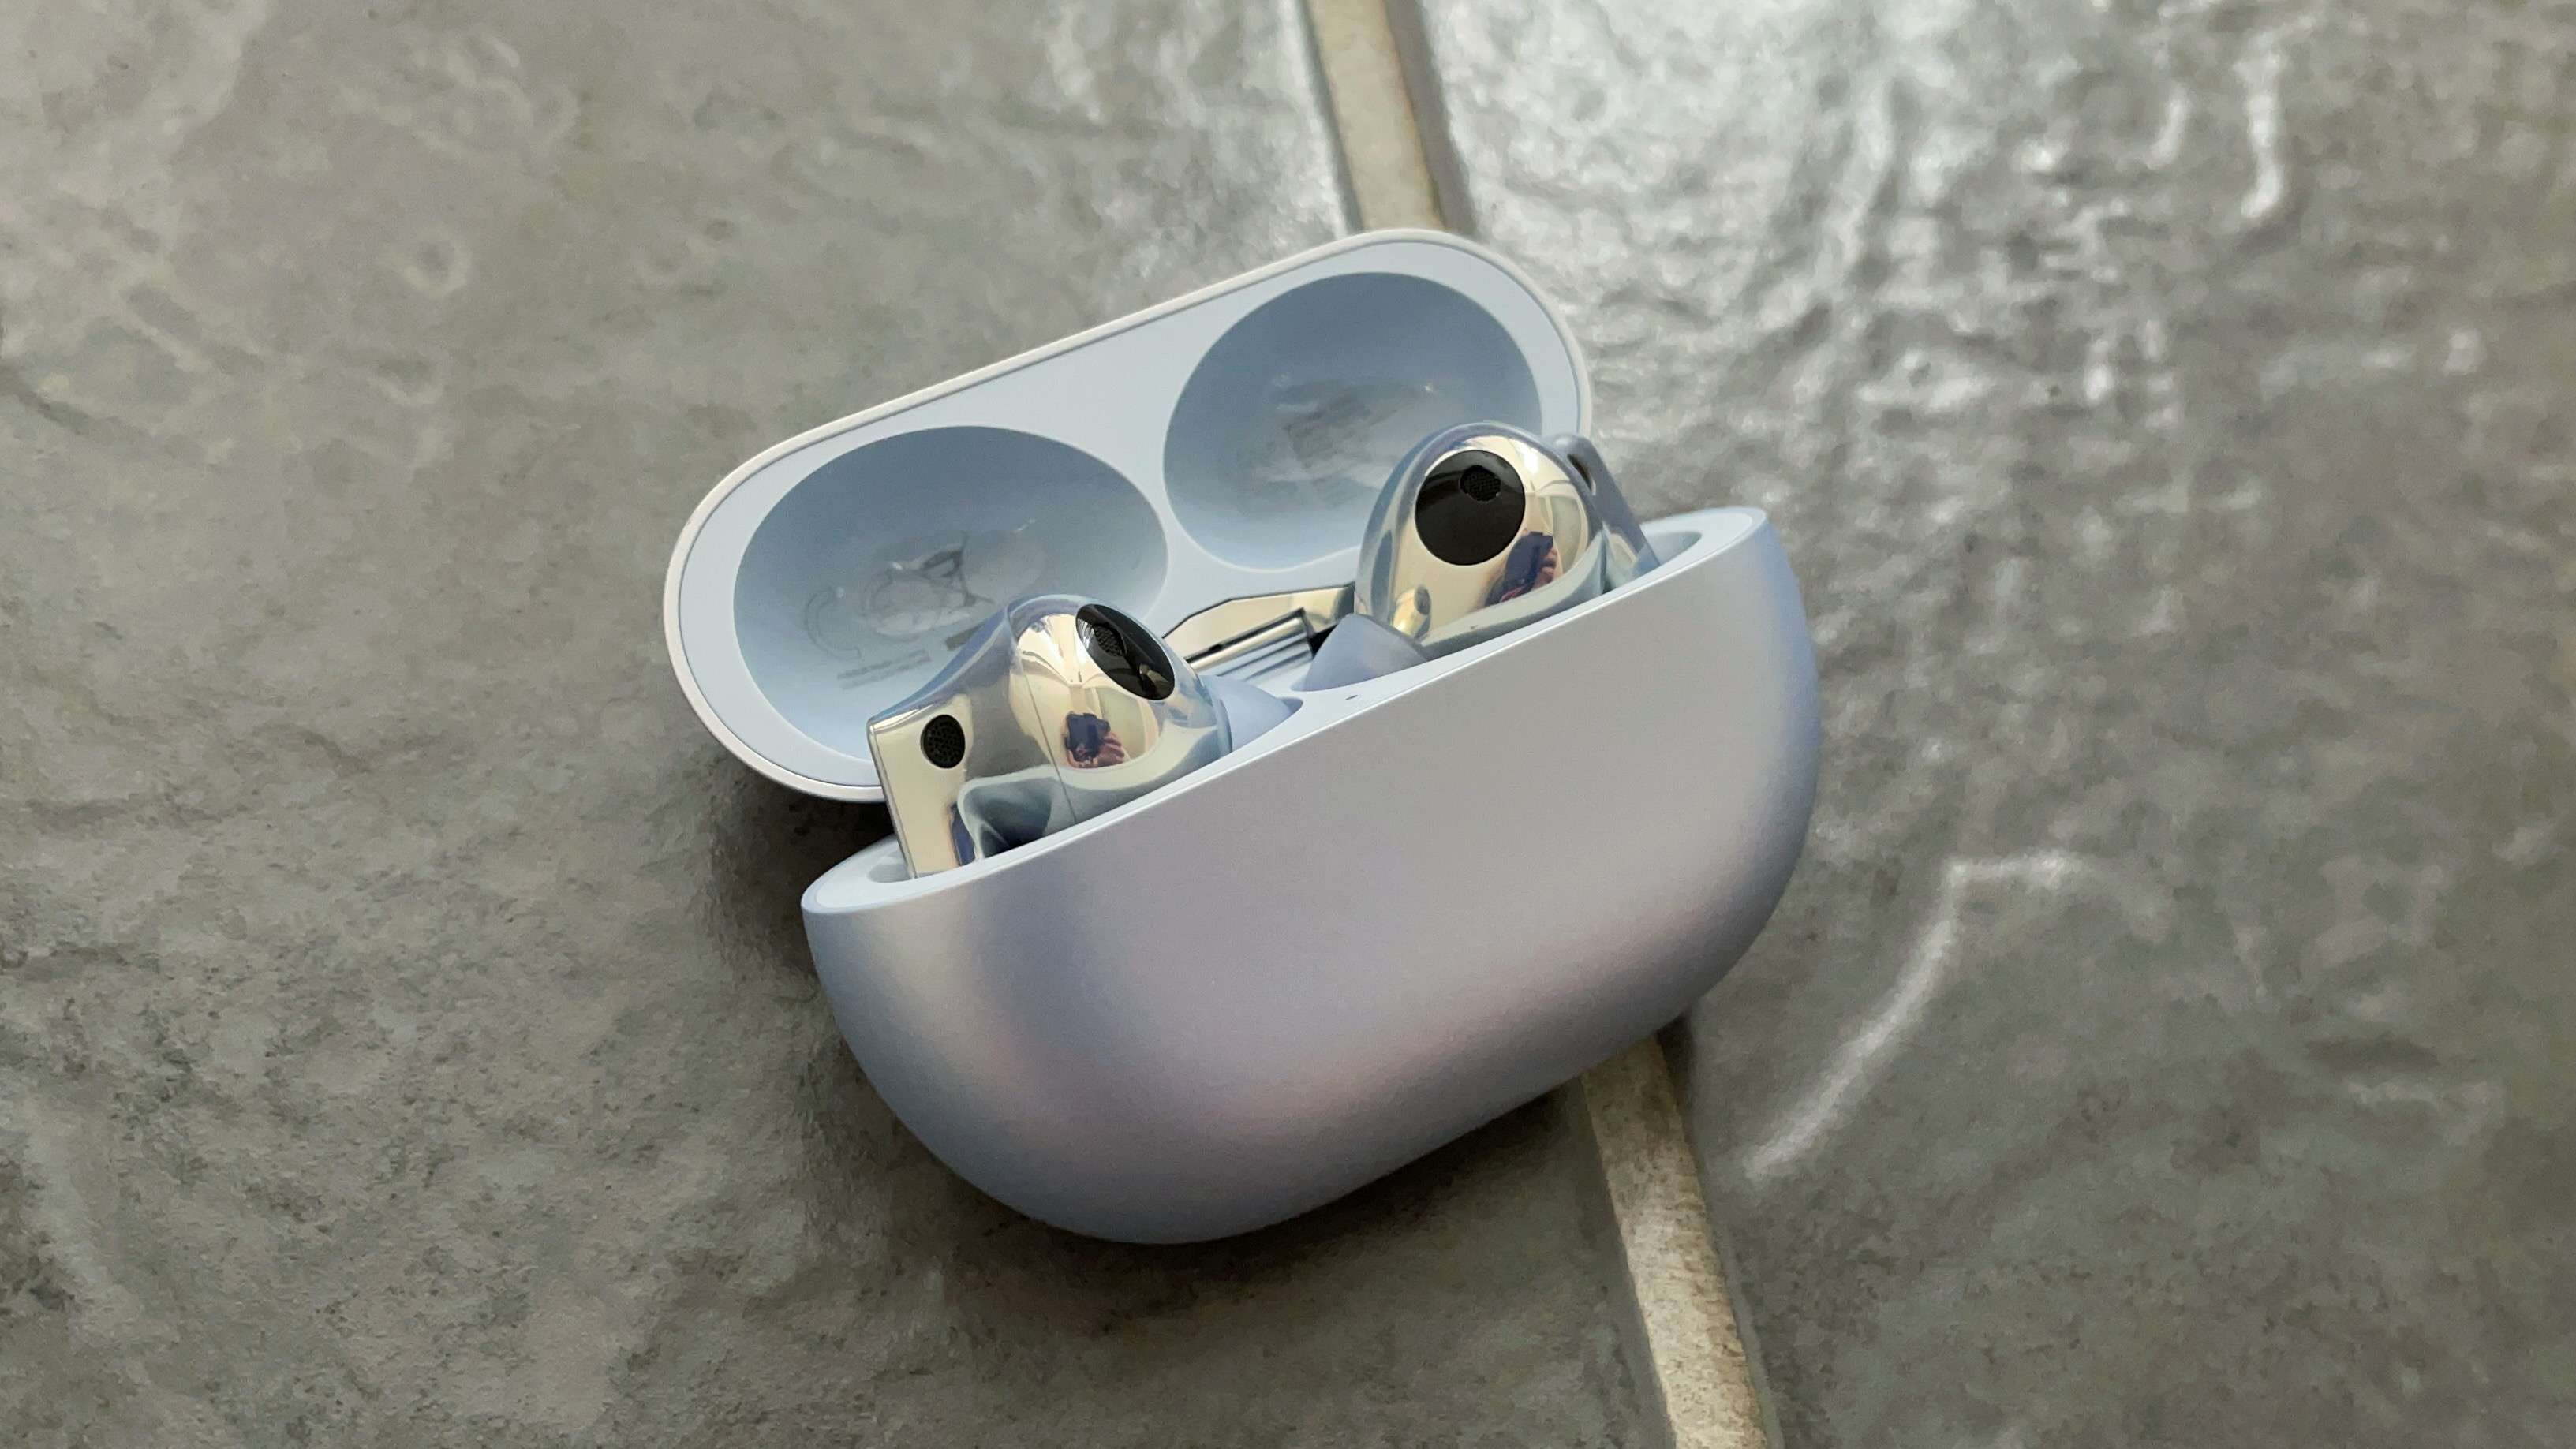 Huawei FreeBuds 5 review - Comfy in-ears with good sound